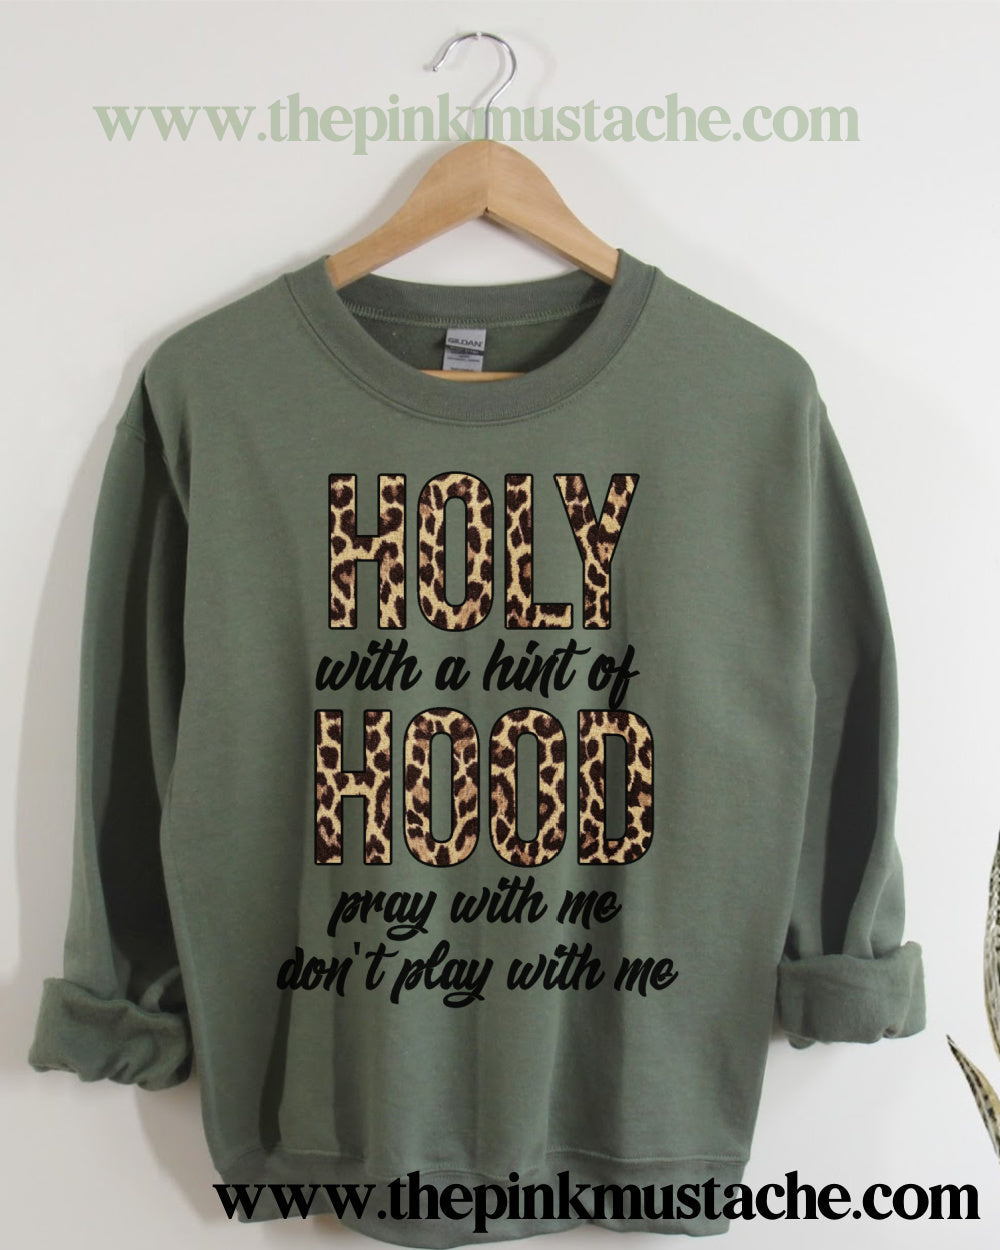 Holy With A Hint Of Hood - That Means Pray With Me Don't Play With Me - Super Soft Oversized Sweatshirt / Bella Canvas Quality Sweatshirt